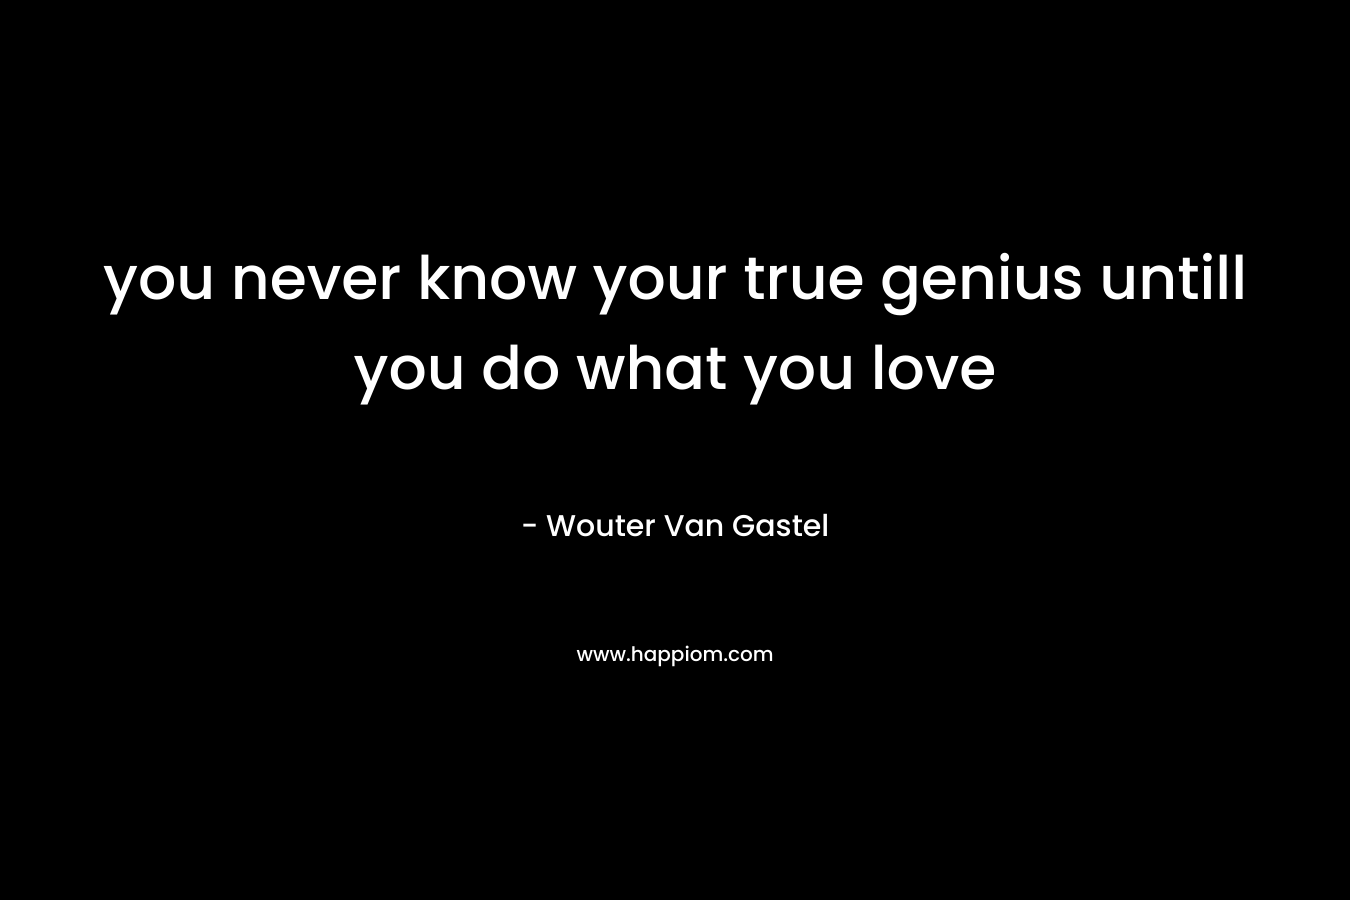 you never know your true genius untill you do what you love – Wouter Van Gastel